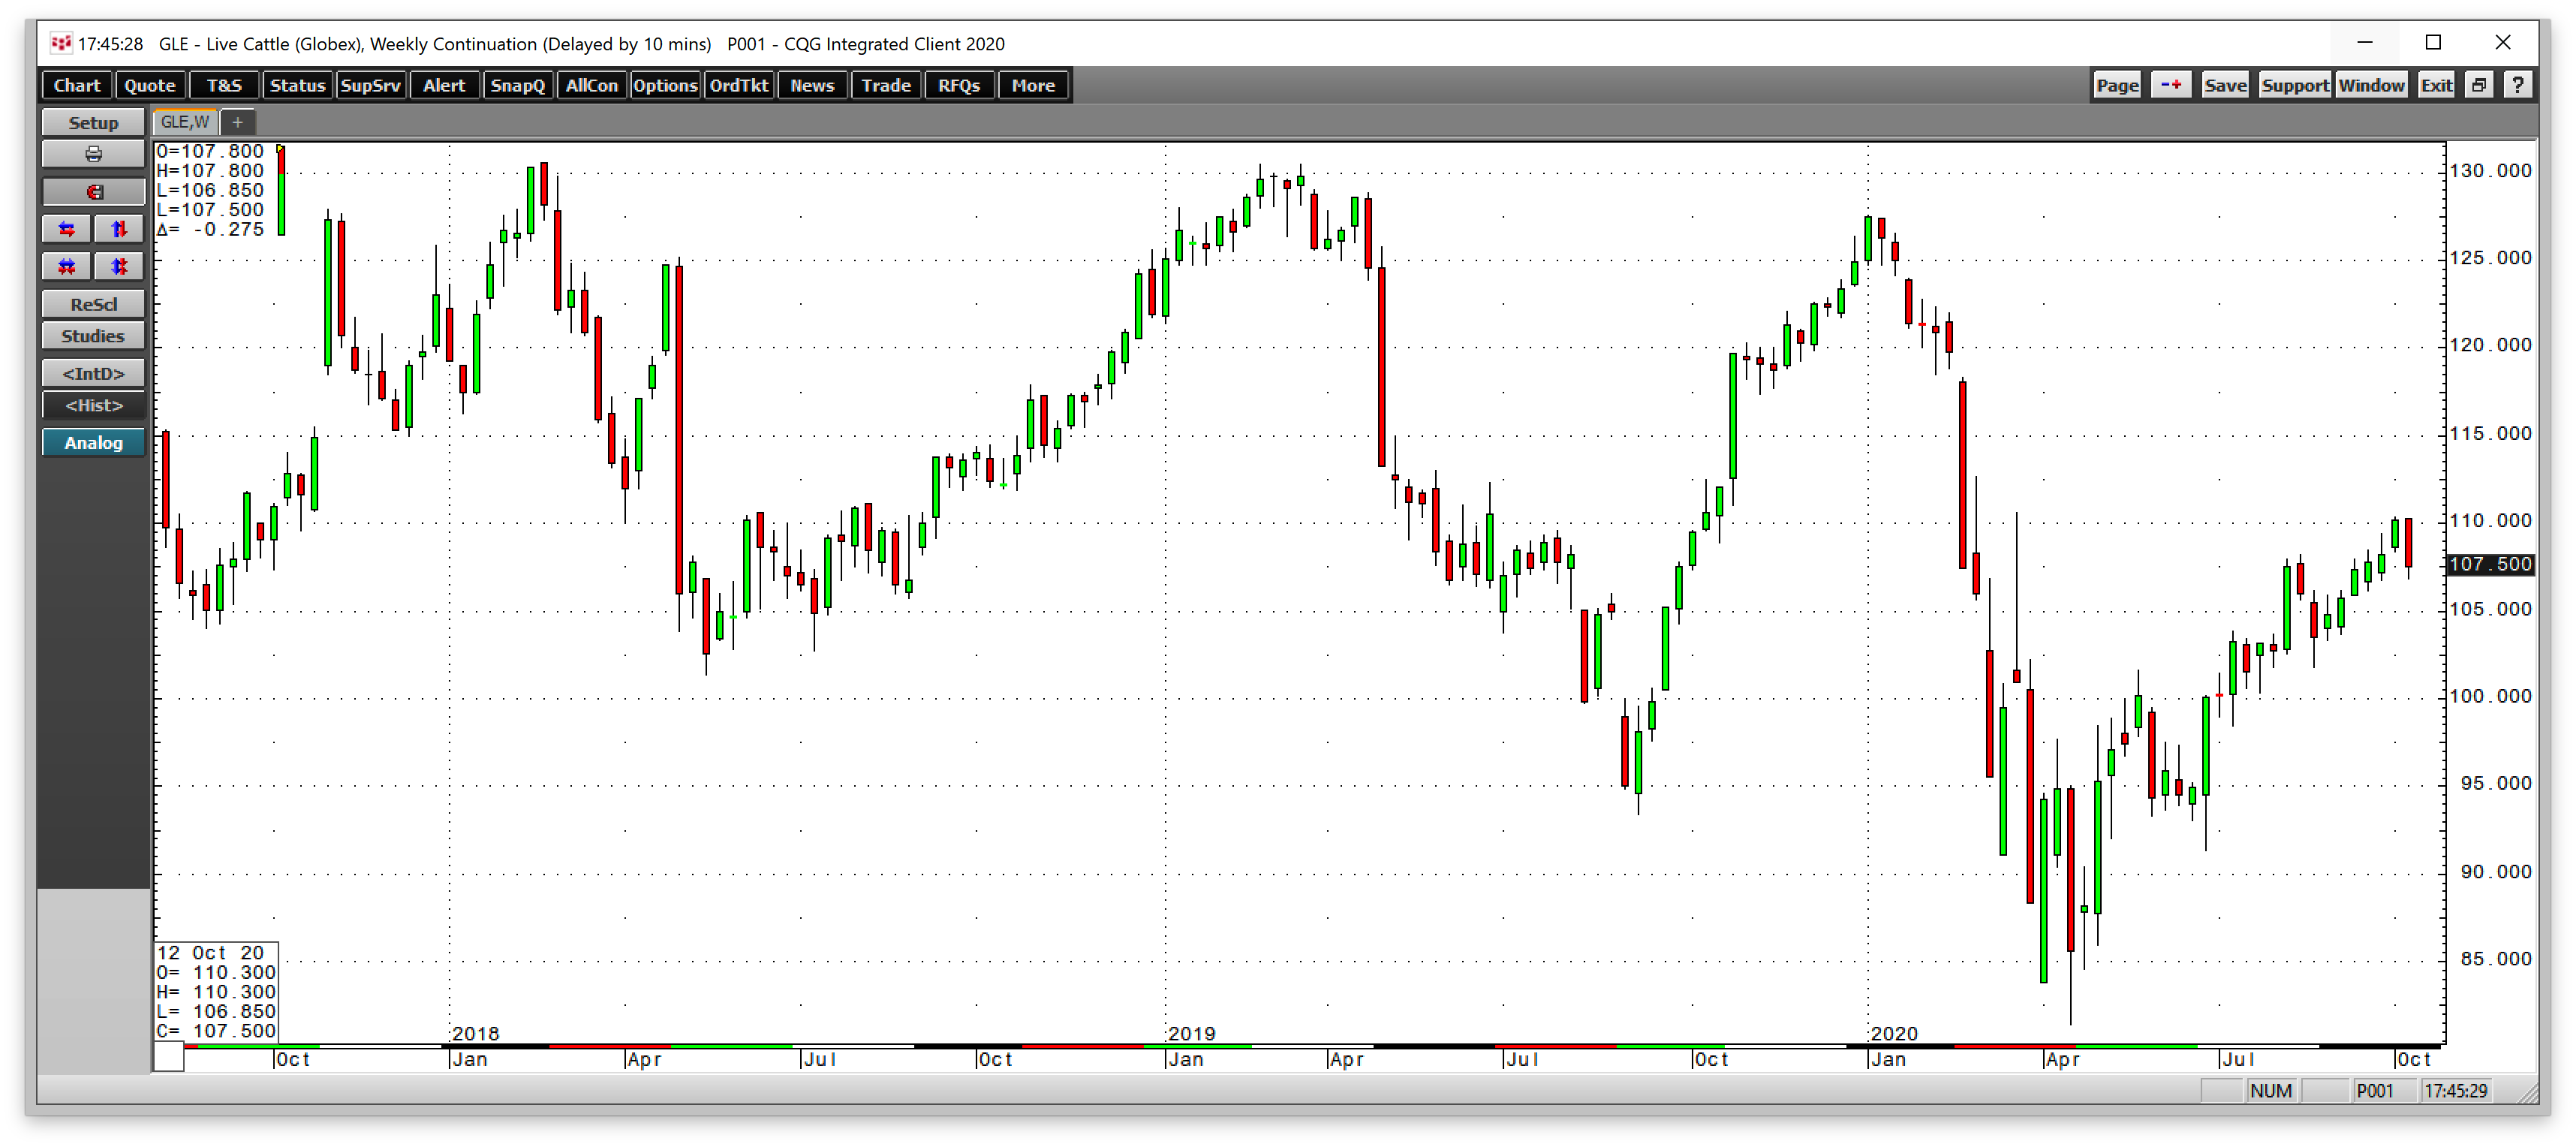 Cattle Futures Weekly Chart